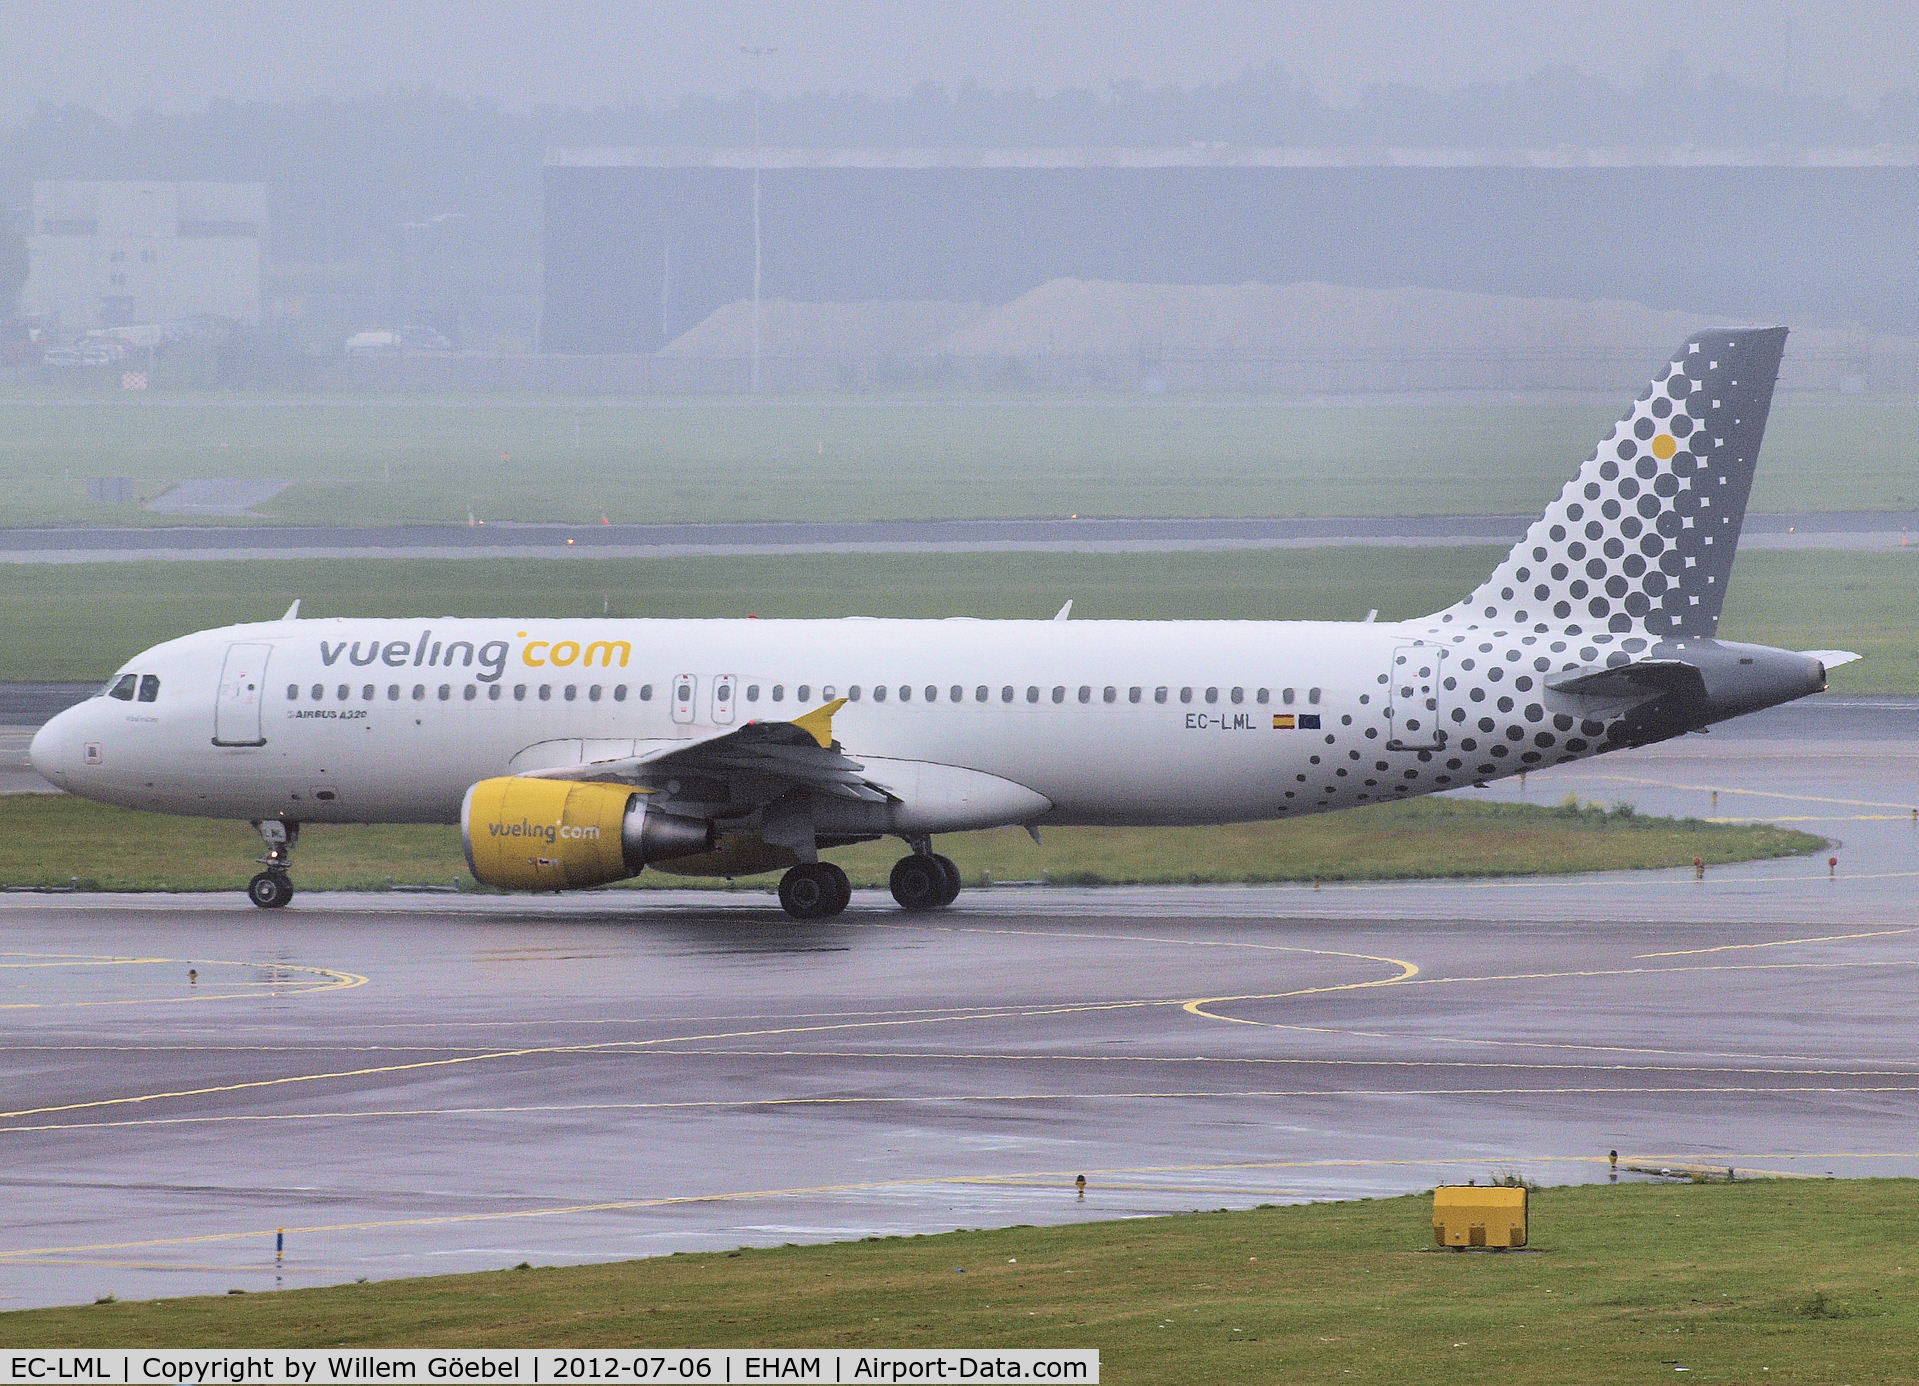 EC-LML, 2011 Airbus A320-214 C/N 4742, Taxi to runway 24 of Schiphol Airport